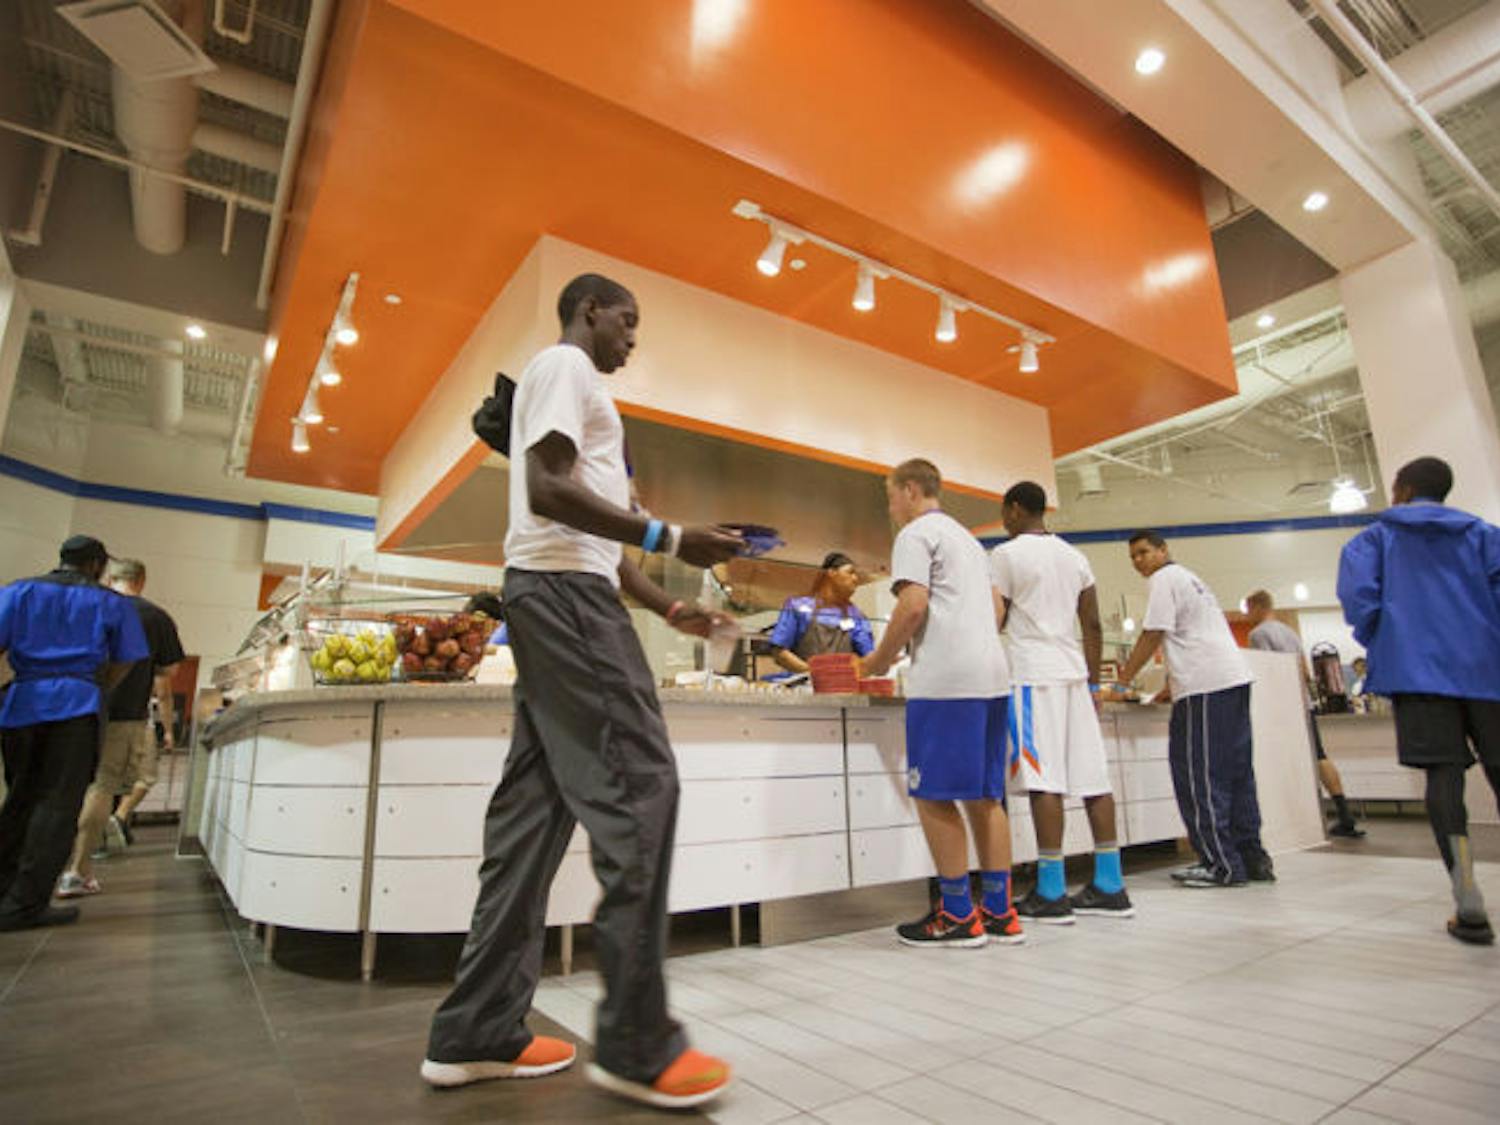 Customers peruse and eat at Gator Corner Dining Center. It reopened Monday after a $2.5 million renovation.